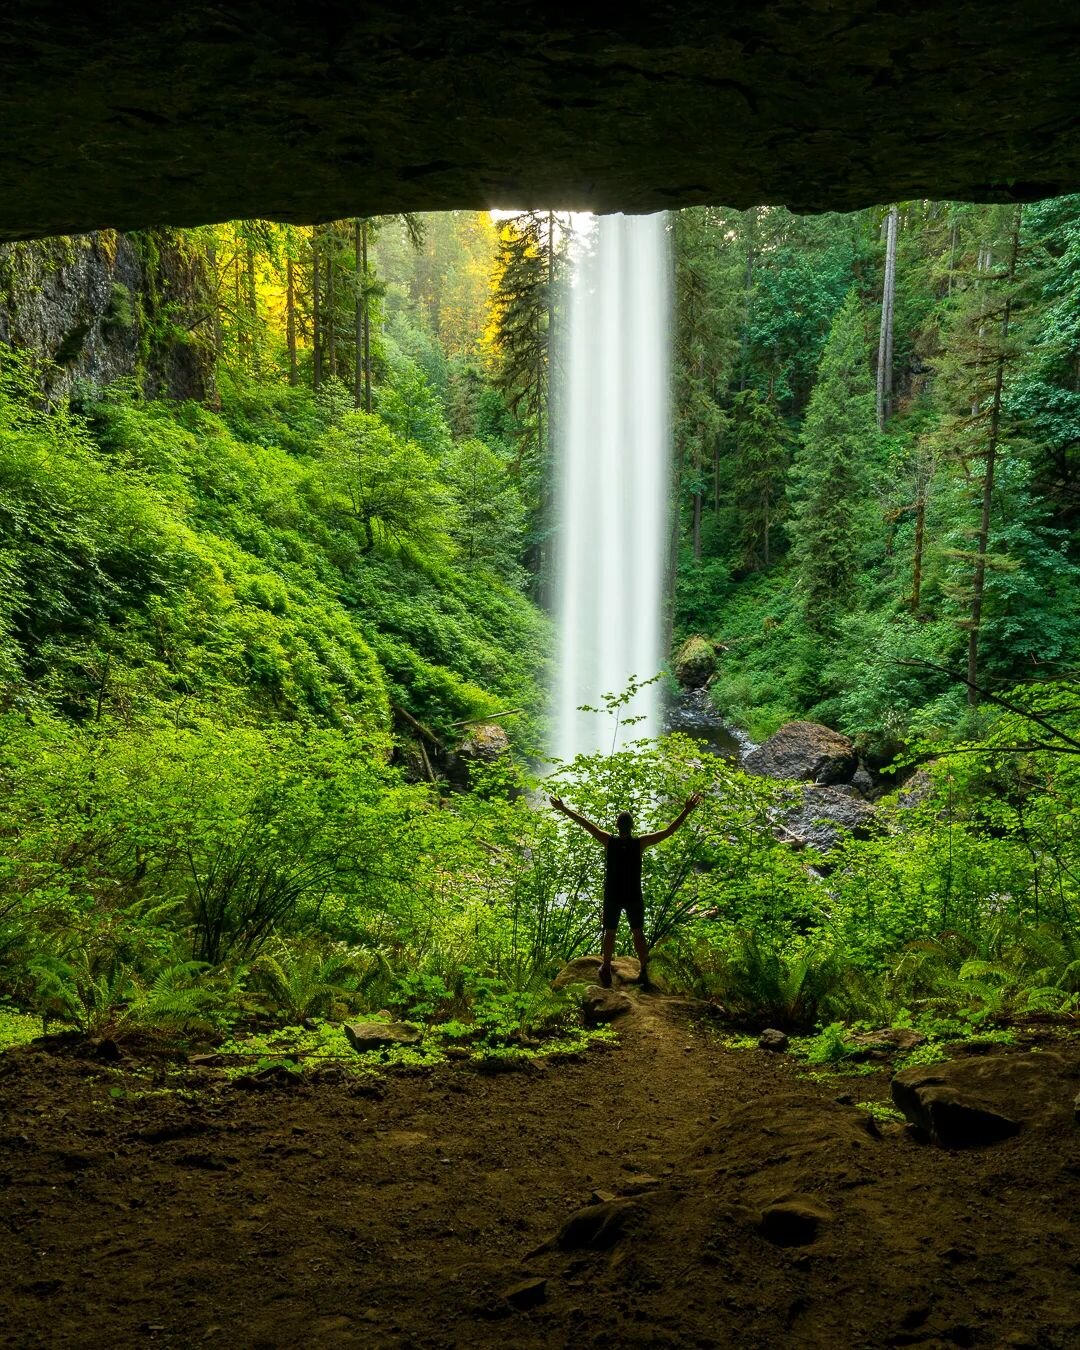 Gotta seek out the light when you're in a cave. For more info on some of the best waterfalls in Oregon: exploremorenature.com/oregonwaterfallsroadtrip